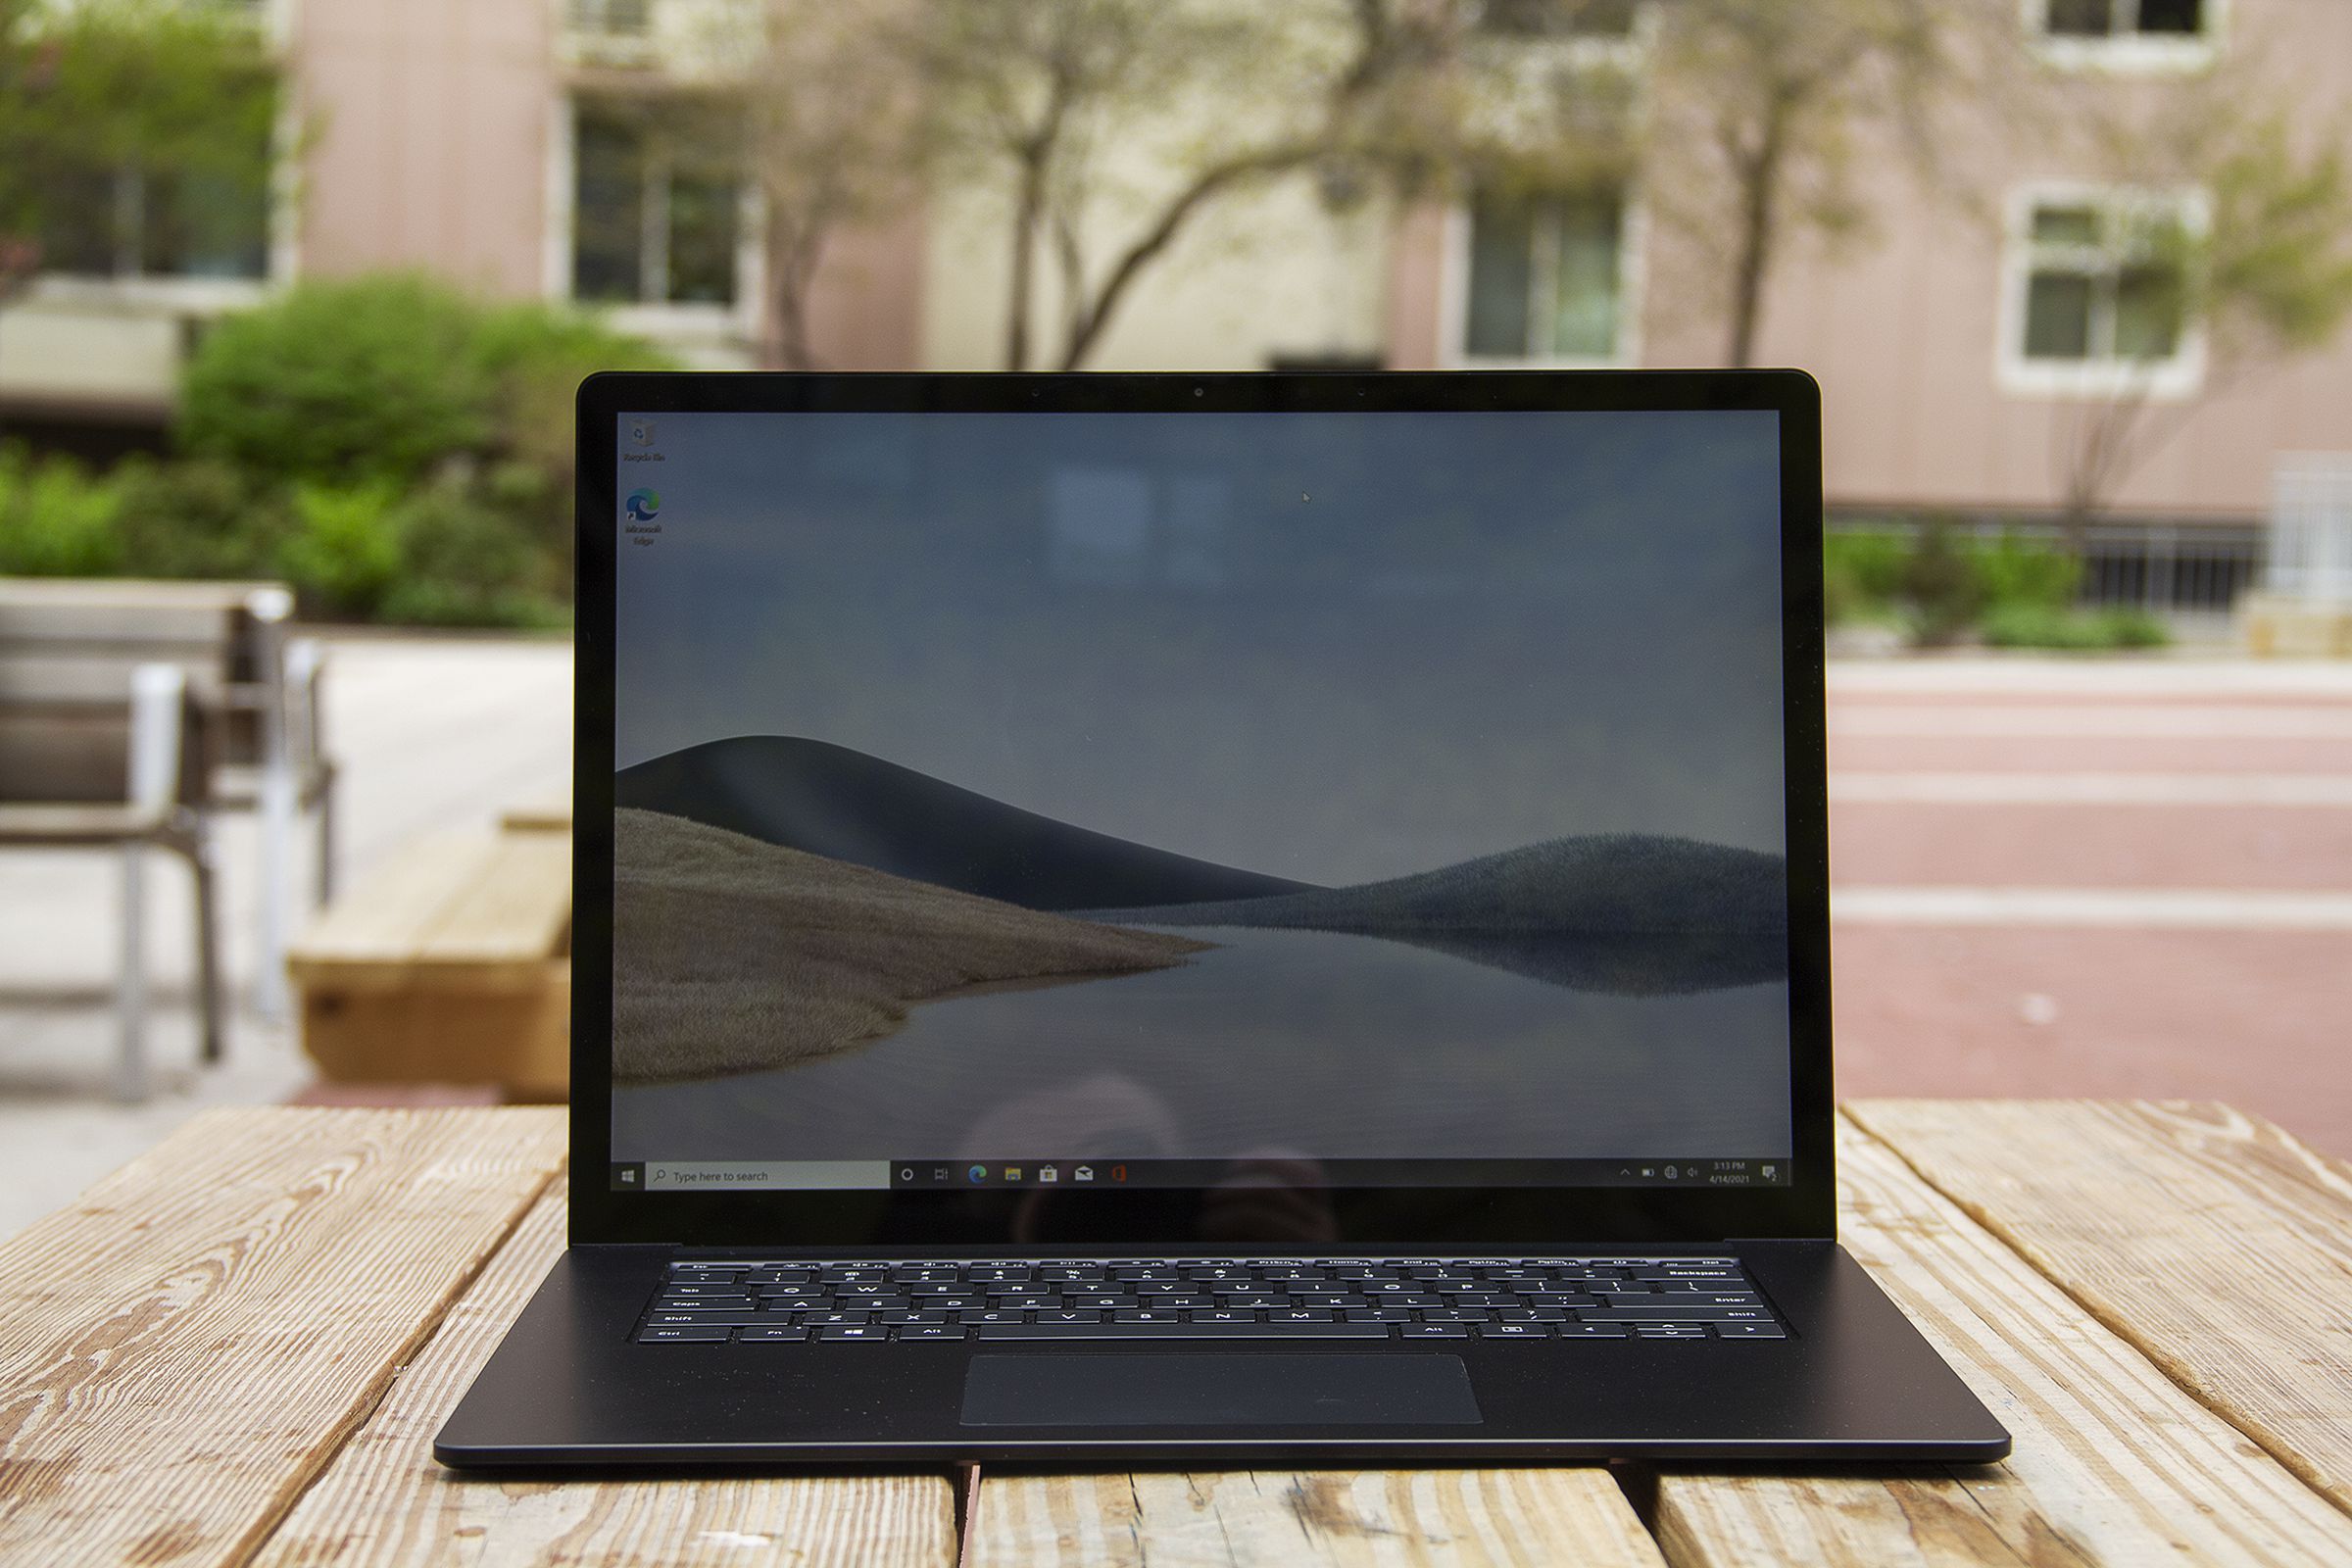 The Surface Laptop 4 15-inch open on a picnic table with a pink apartment building in the background. The screen displays sand dunes with a blue sky.